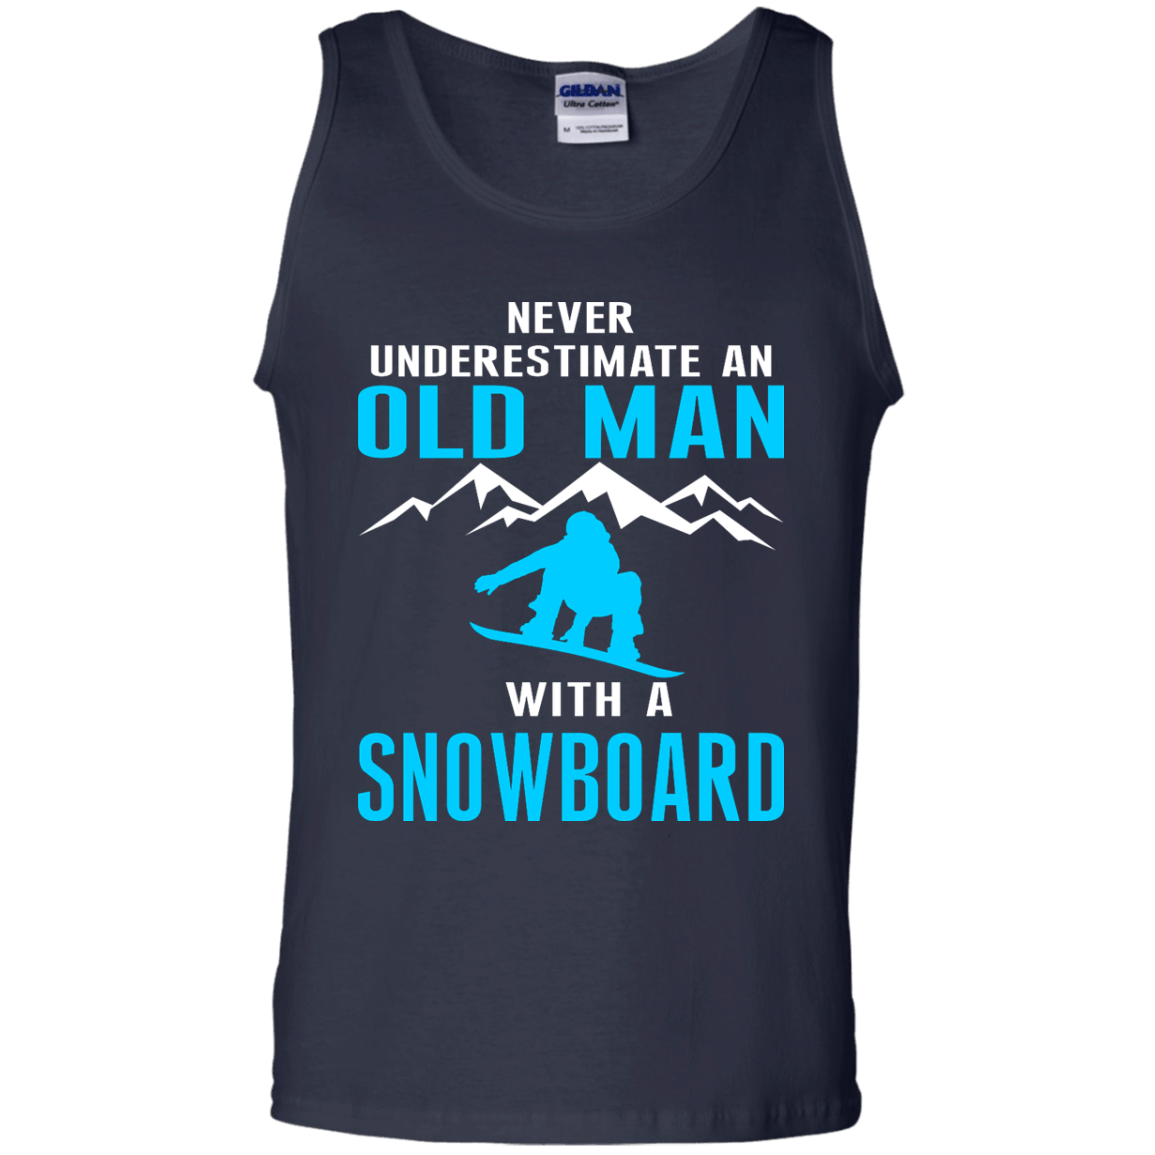 Never Underestimate An Old Man With A Snowboard Tank Tops - Powderaddicts